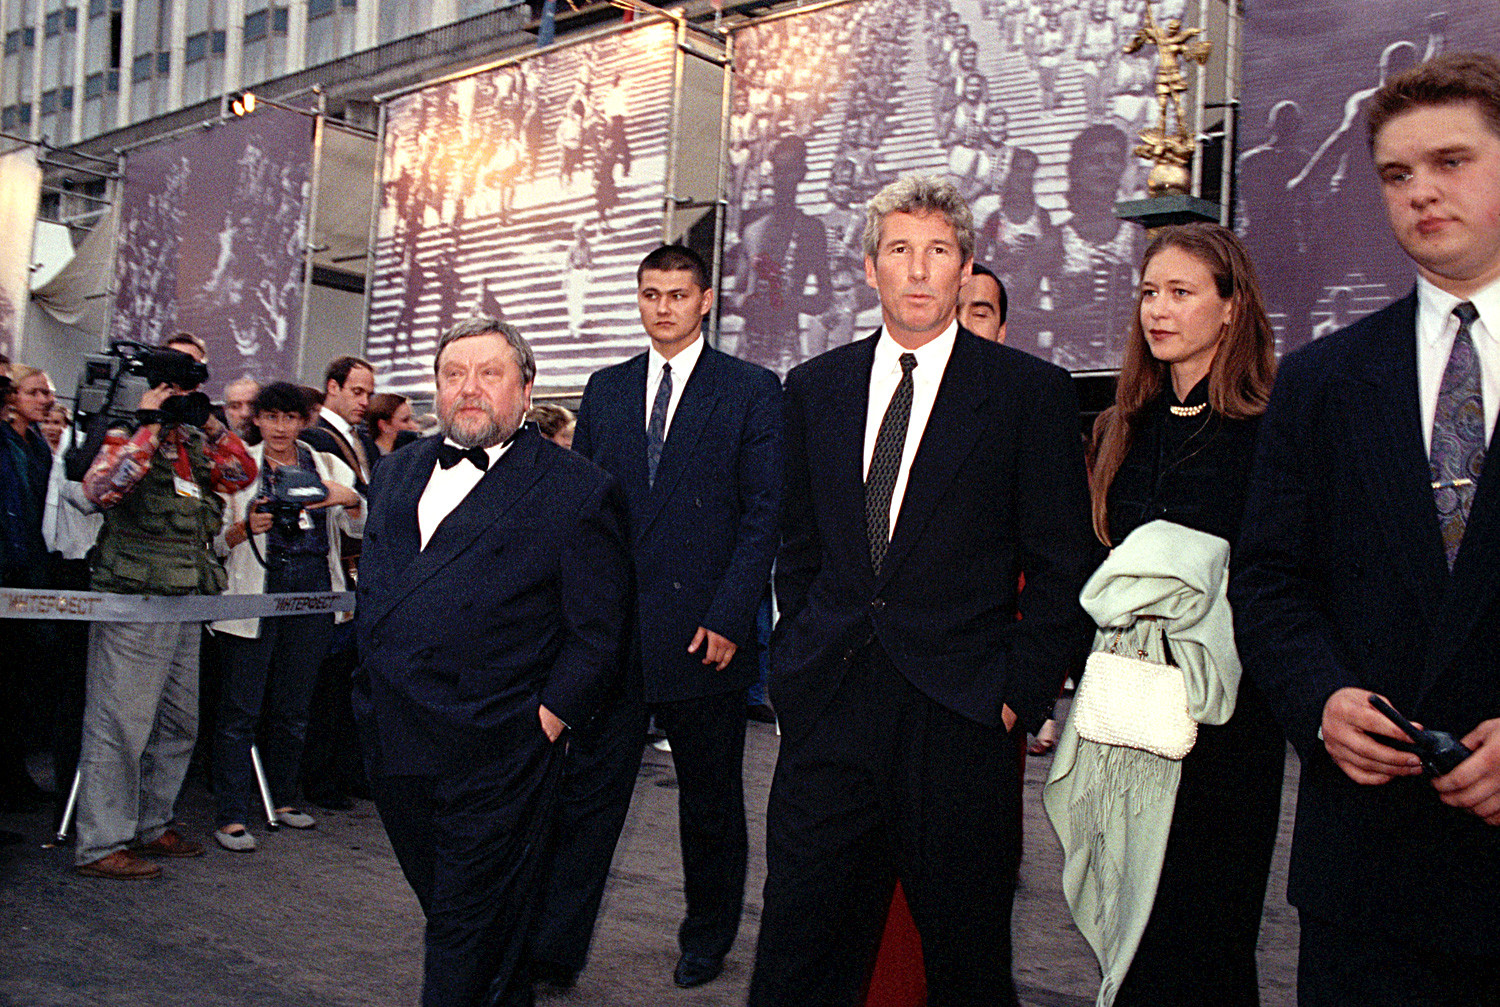 At the 19th Moscow International Film Festival Richard Gere was the jury chairman and his Russian colleague Sergei Solovyev (left) - the forum's president